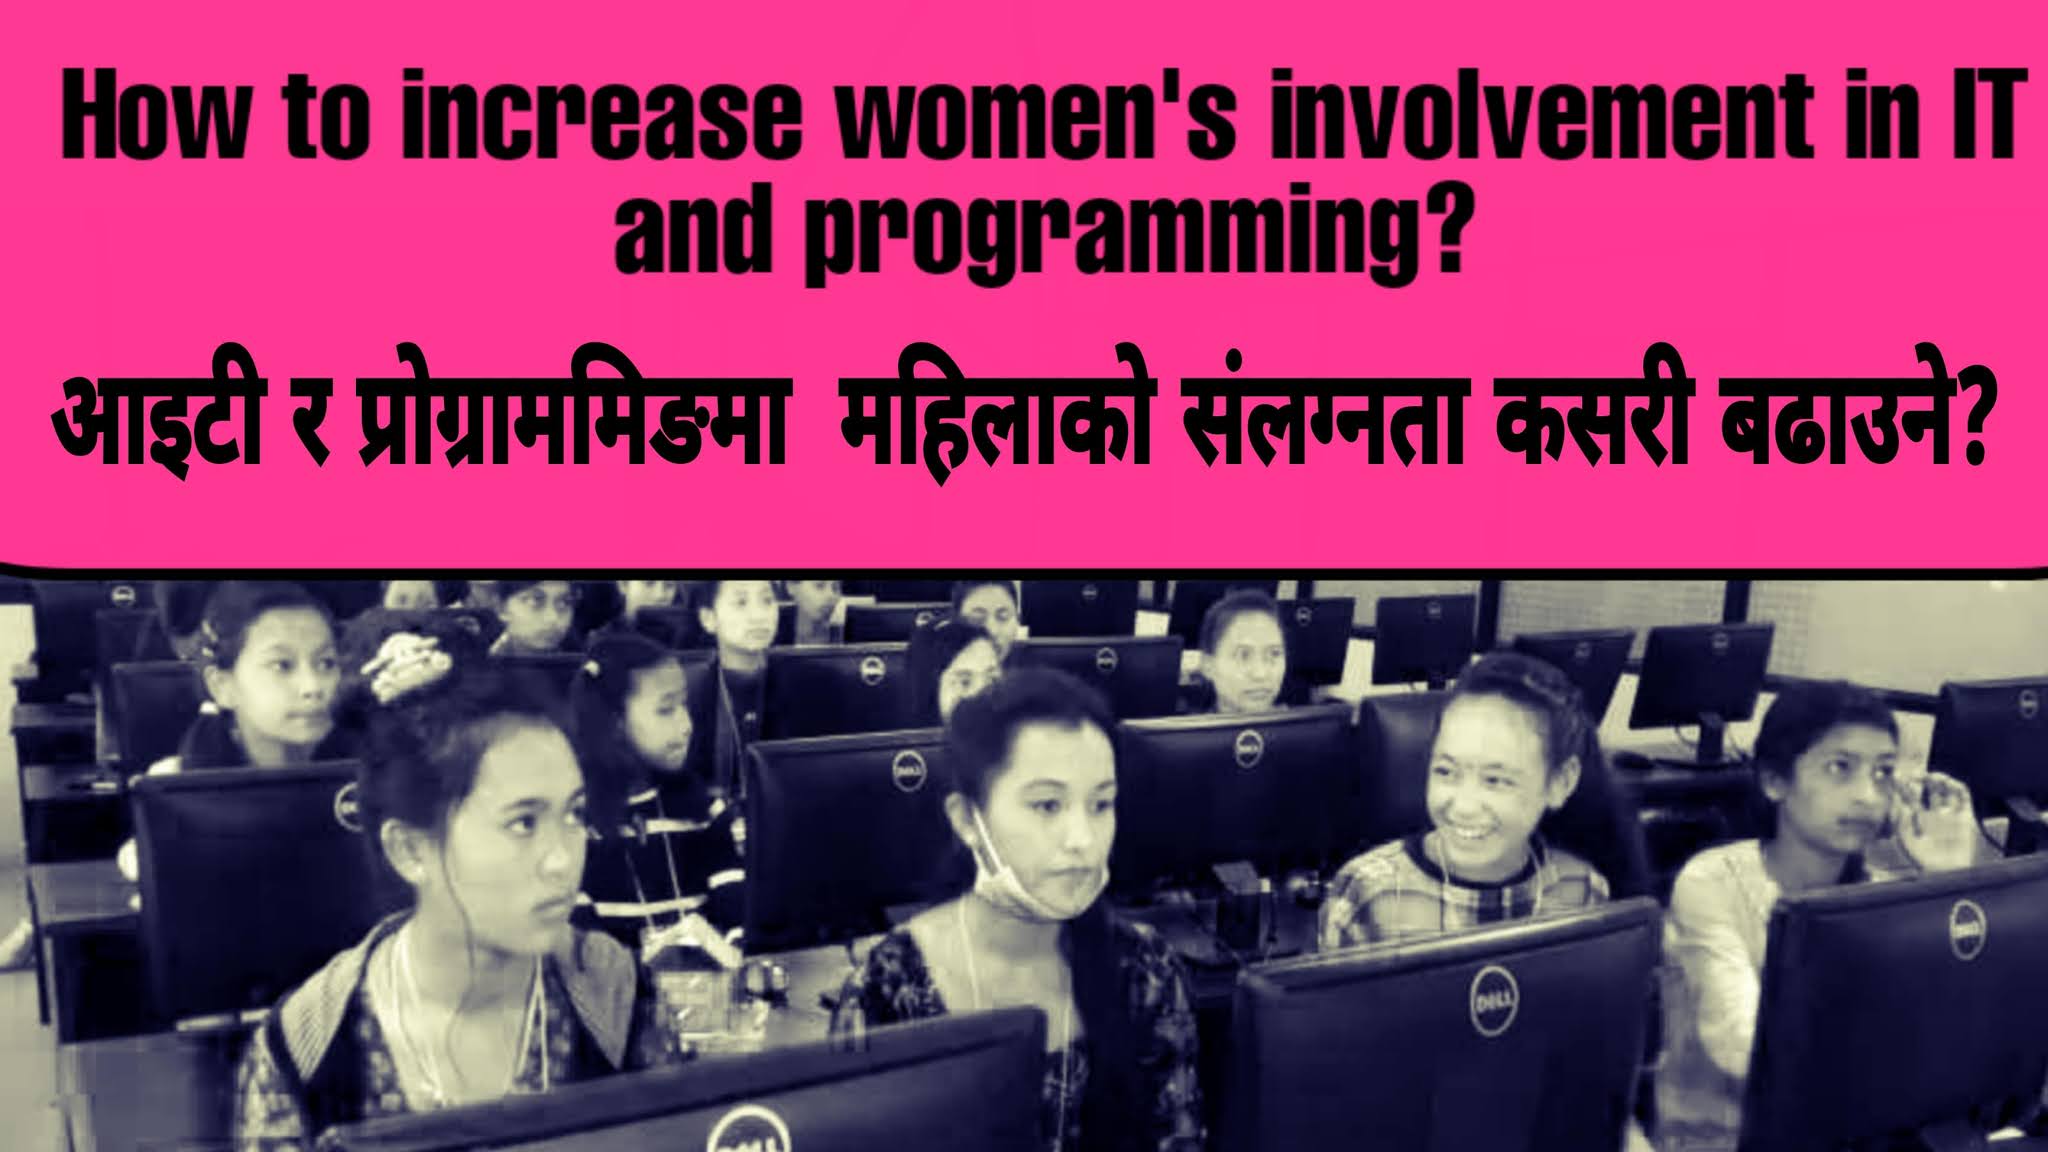 How to increase women's involvement in IT and programming?